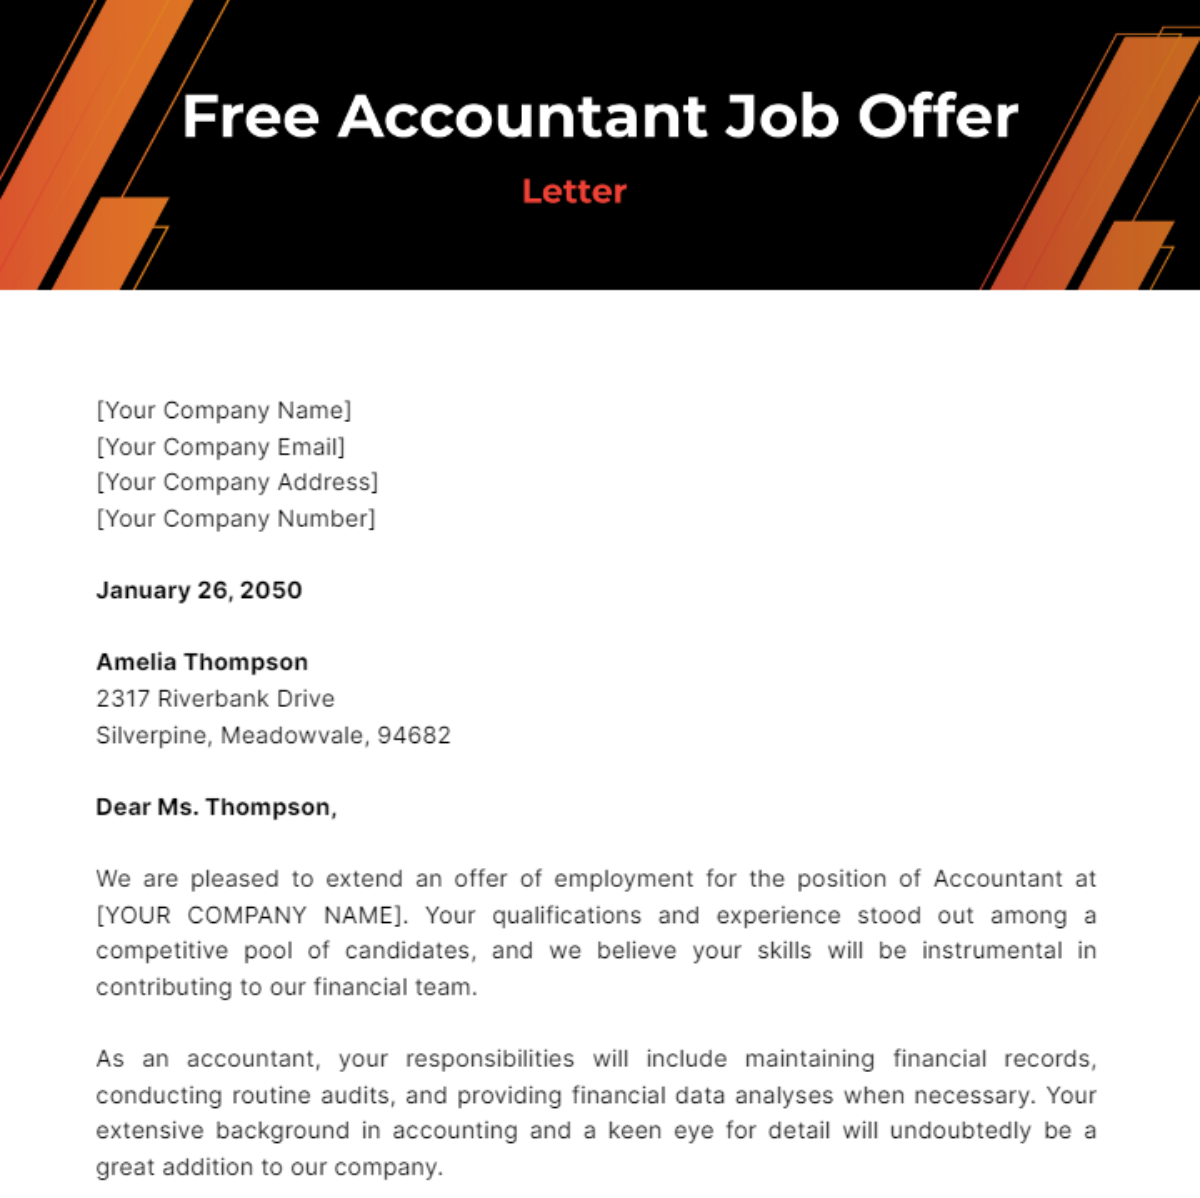 Accountant Job Offer Letter Template